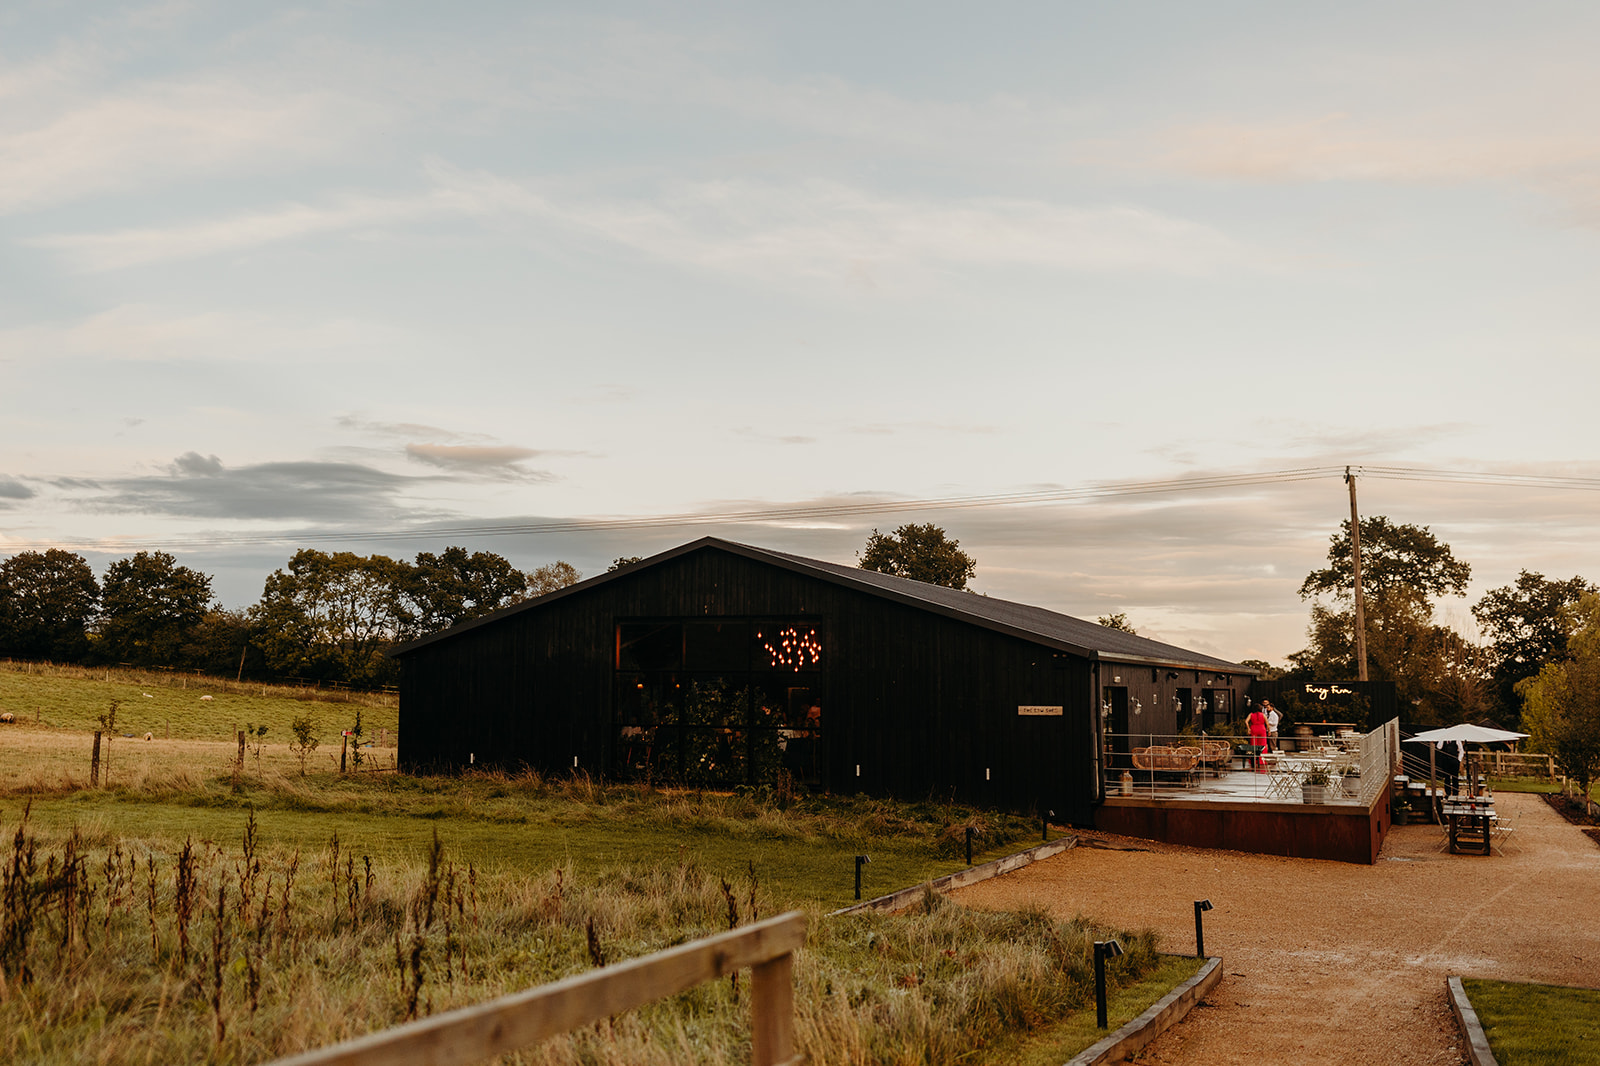 Silchester Farm providing a picturesque and memorable backdrop for the couple's countryside wedding.
